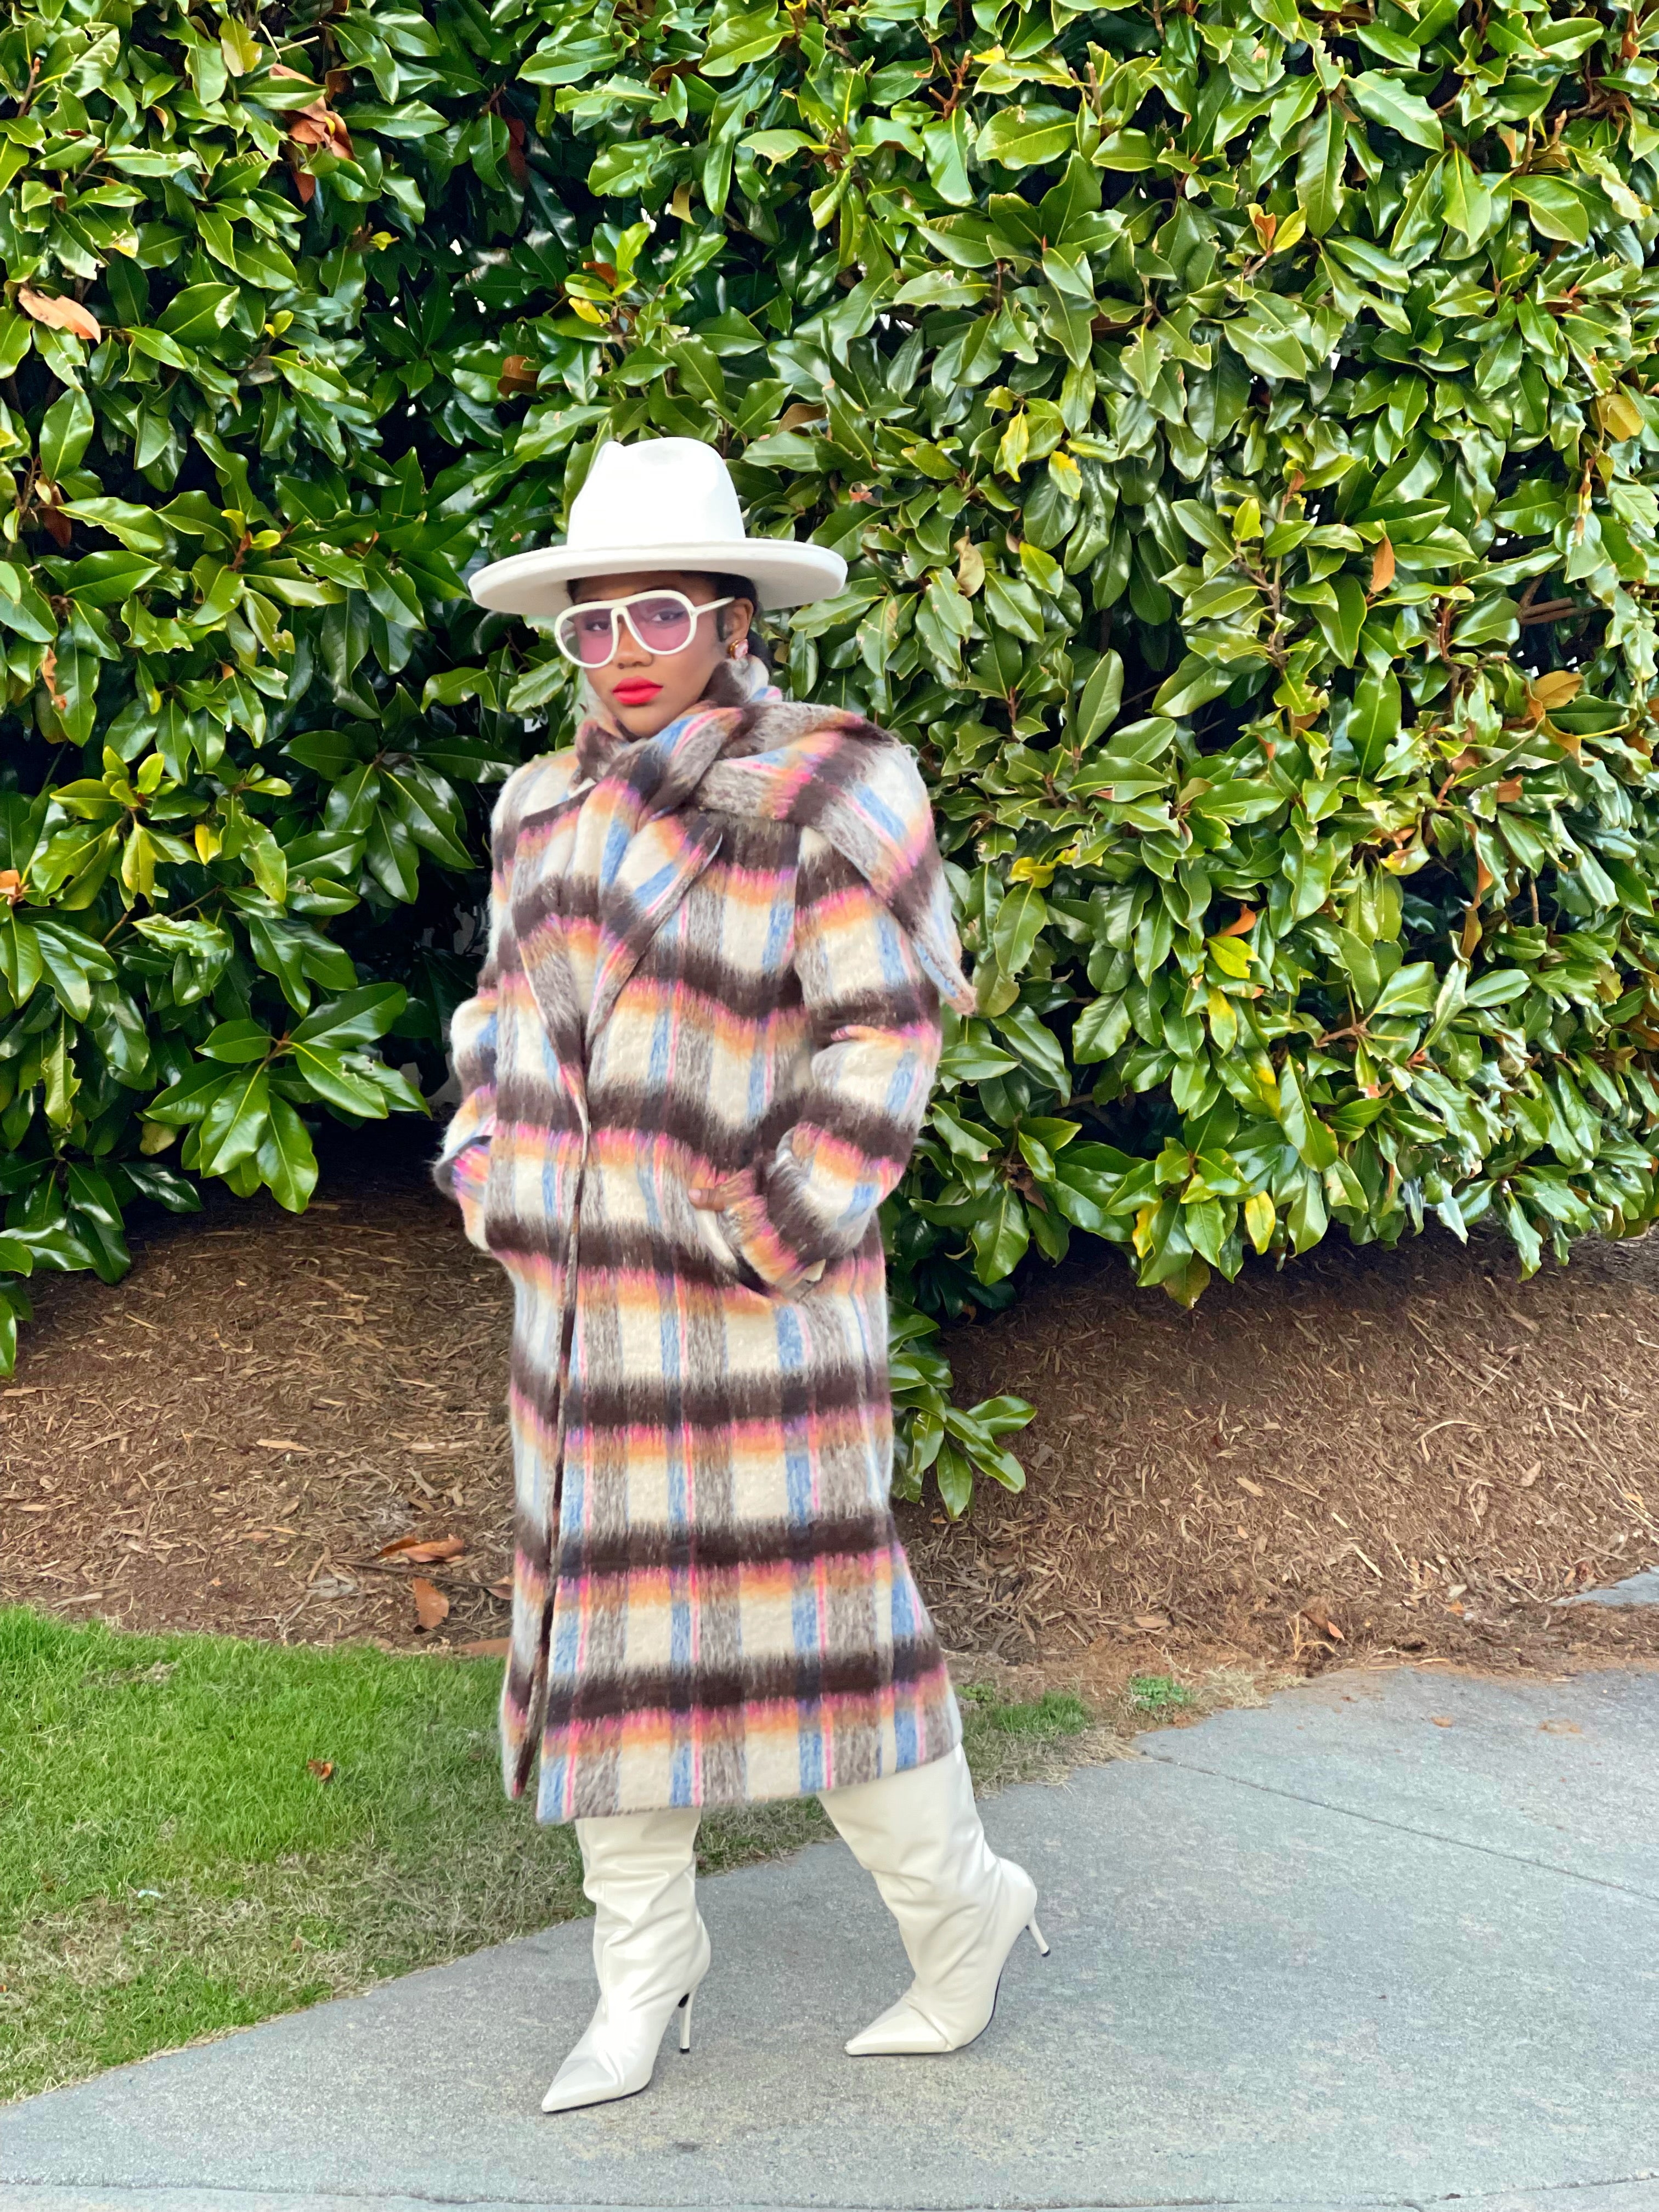 GOLDxTEAL brushed plaid coat with matching scarf.